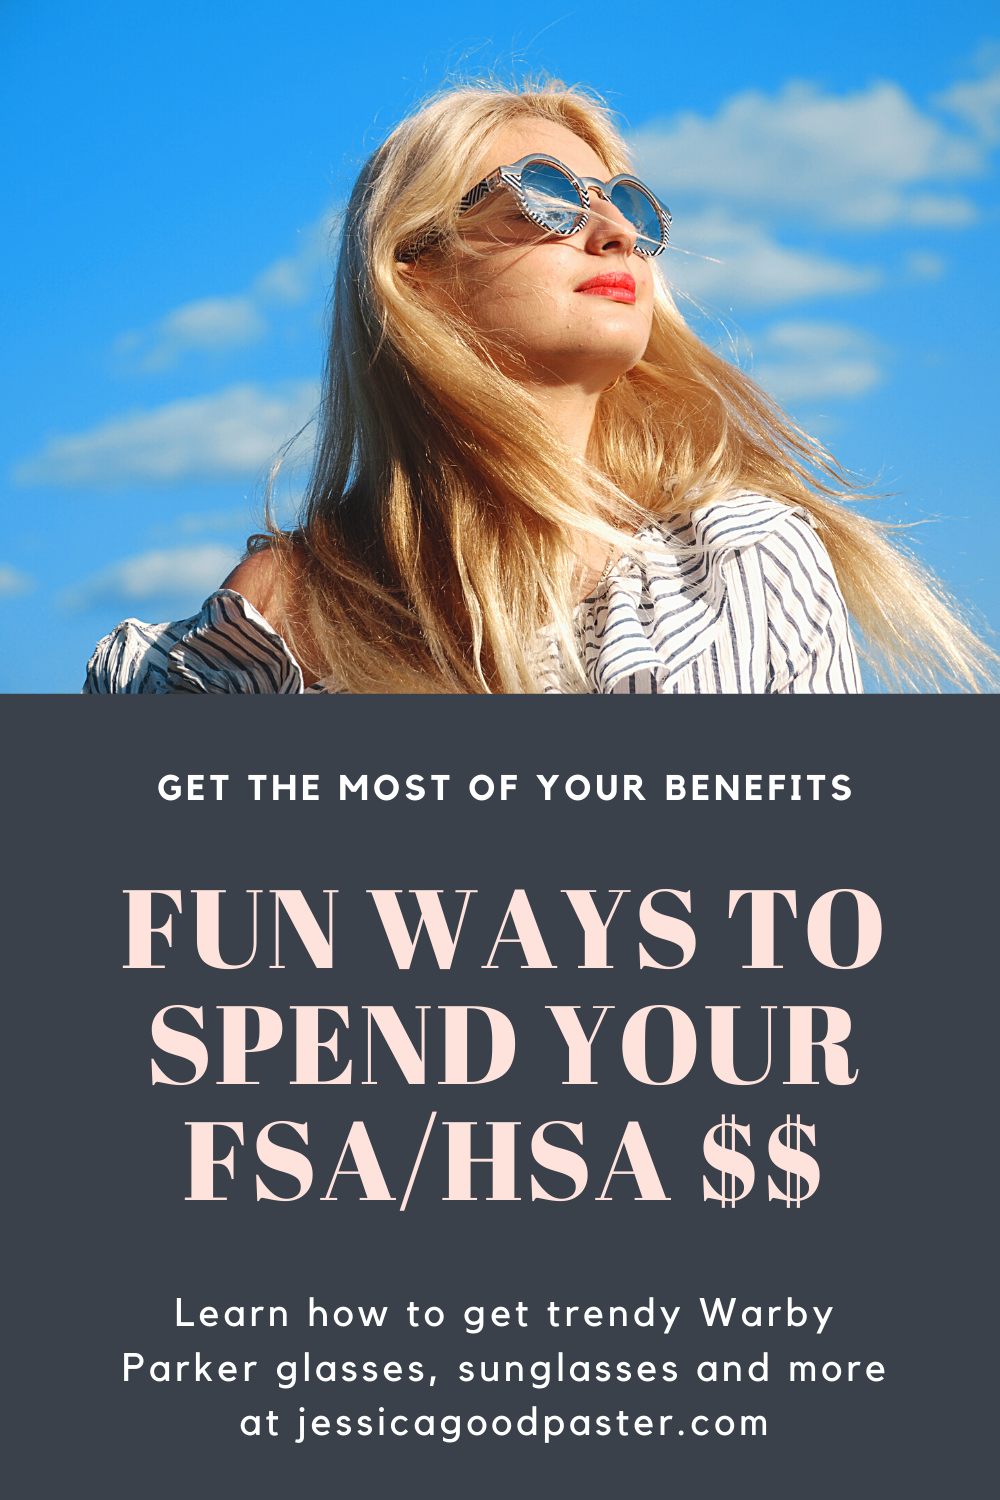 Fun Ways to Spend Your FSA and HSA with Warby Parker | Did you know you can get trendy eyeglasses, prescription sunglasses, contacts, and accessories with your flexible spending account/health savings account (FSA and HSA)? Check out these fun ways to use your benefits at Warby Parker before the end of the year.